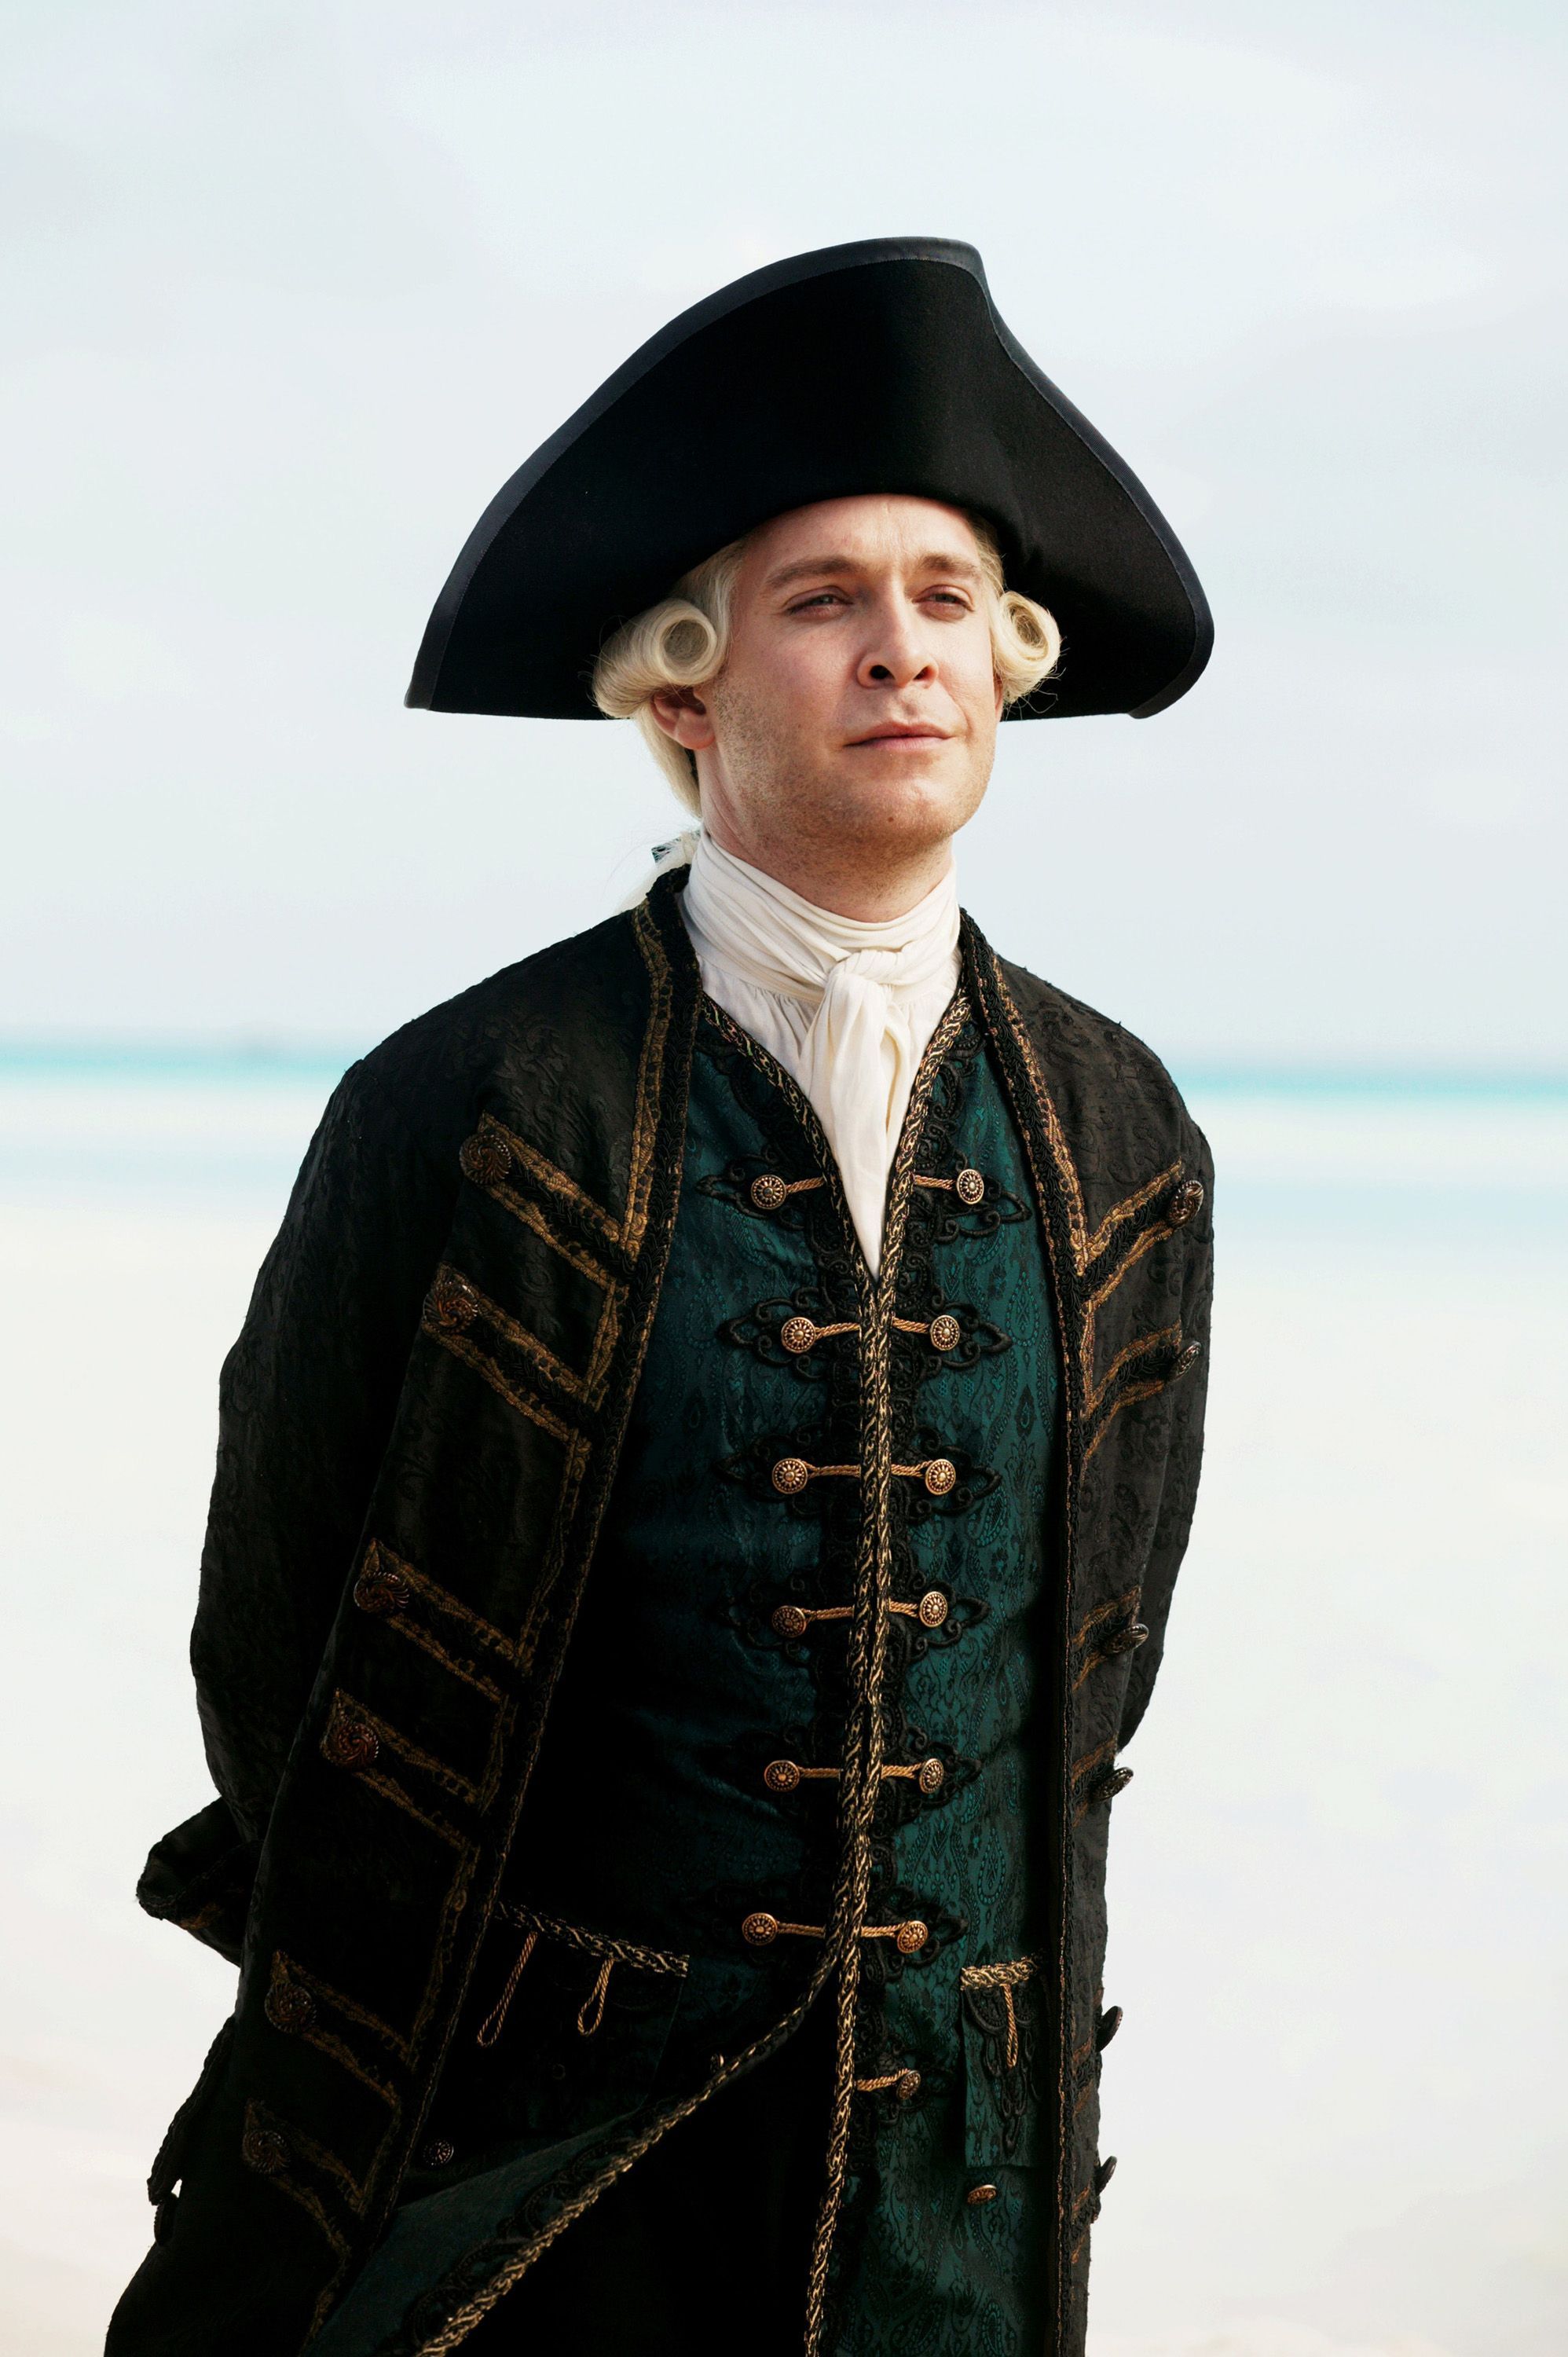 Lord Cutler Beckett Pirates Of The Caribbean Series